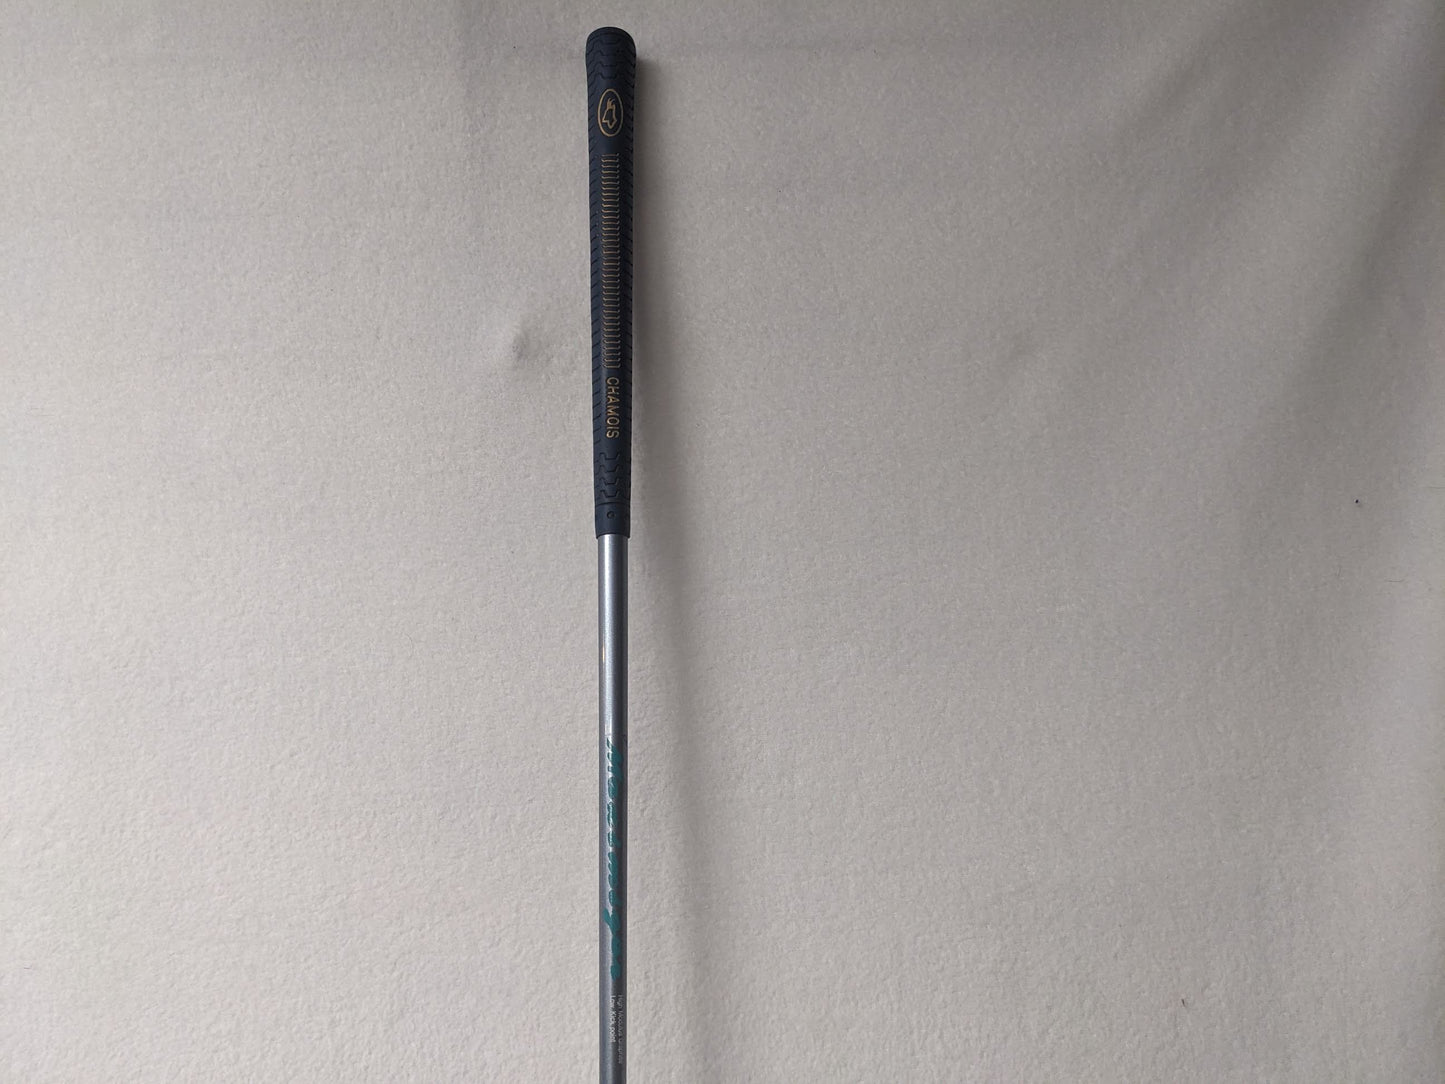 Maximiger Ladies 9 Iron Golf Club Size 36 In Color Gray Condition Used